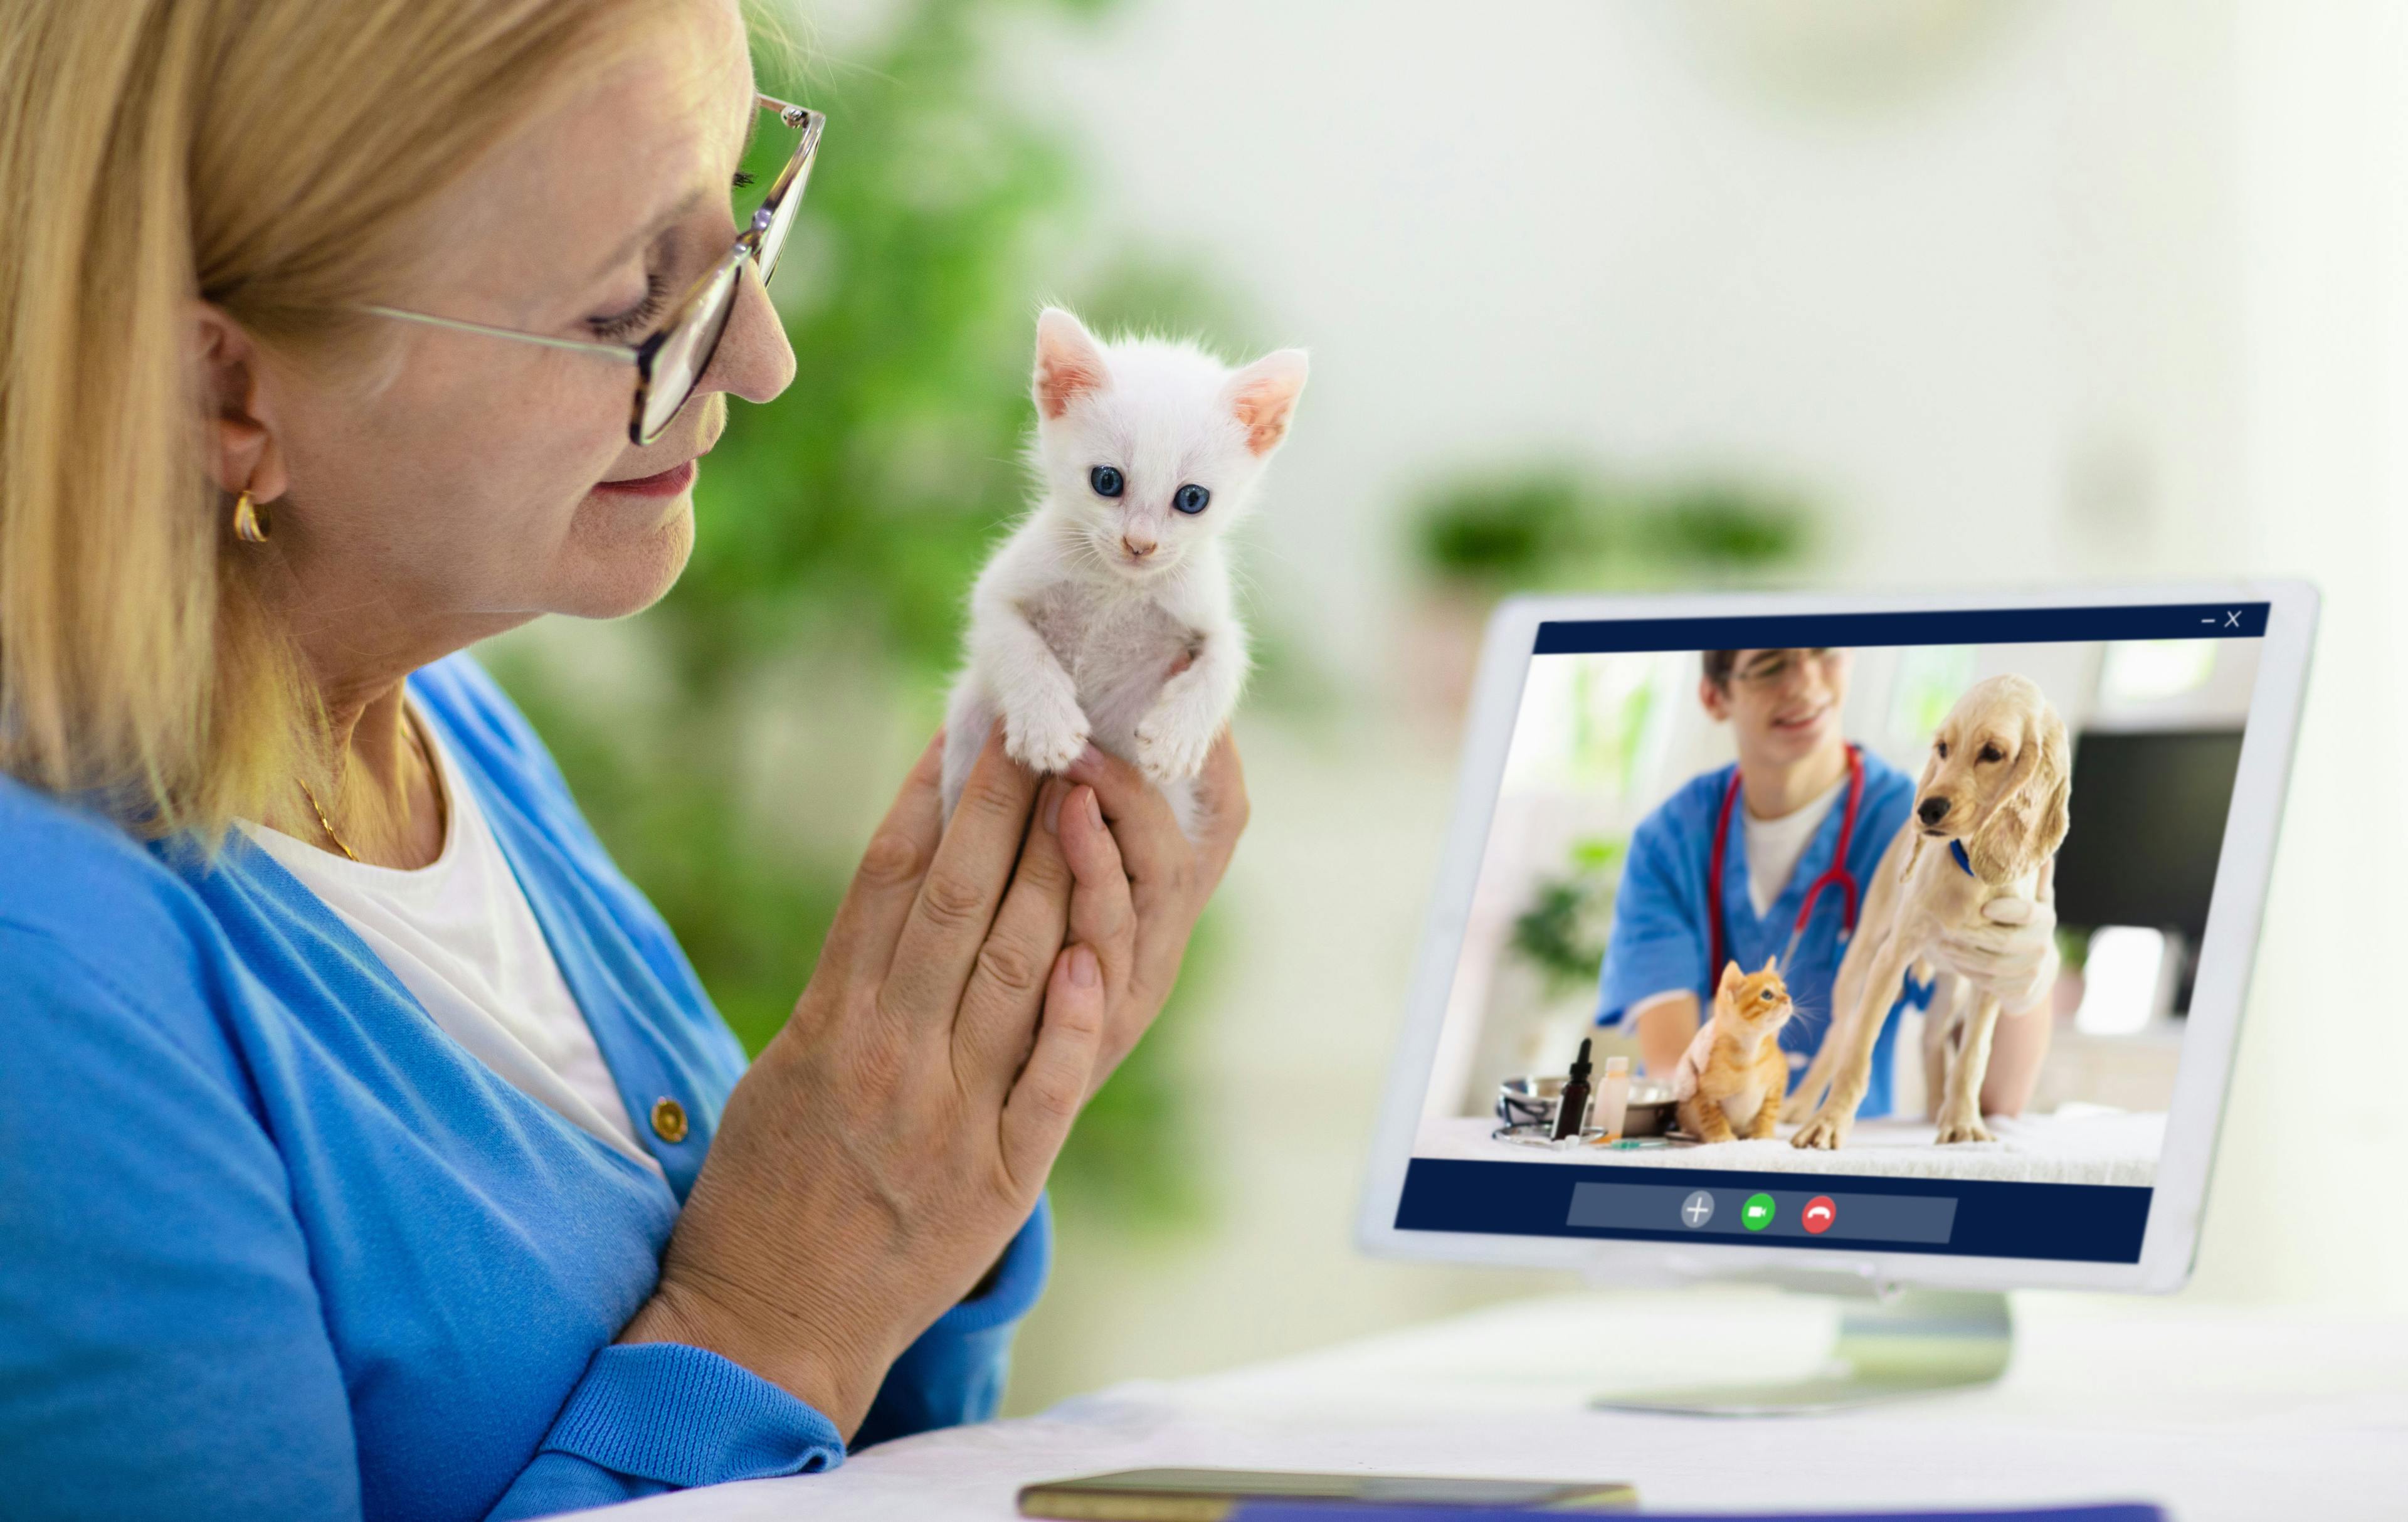 The team approach to veterinary telemedicine